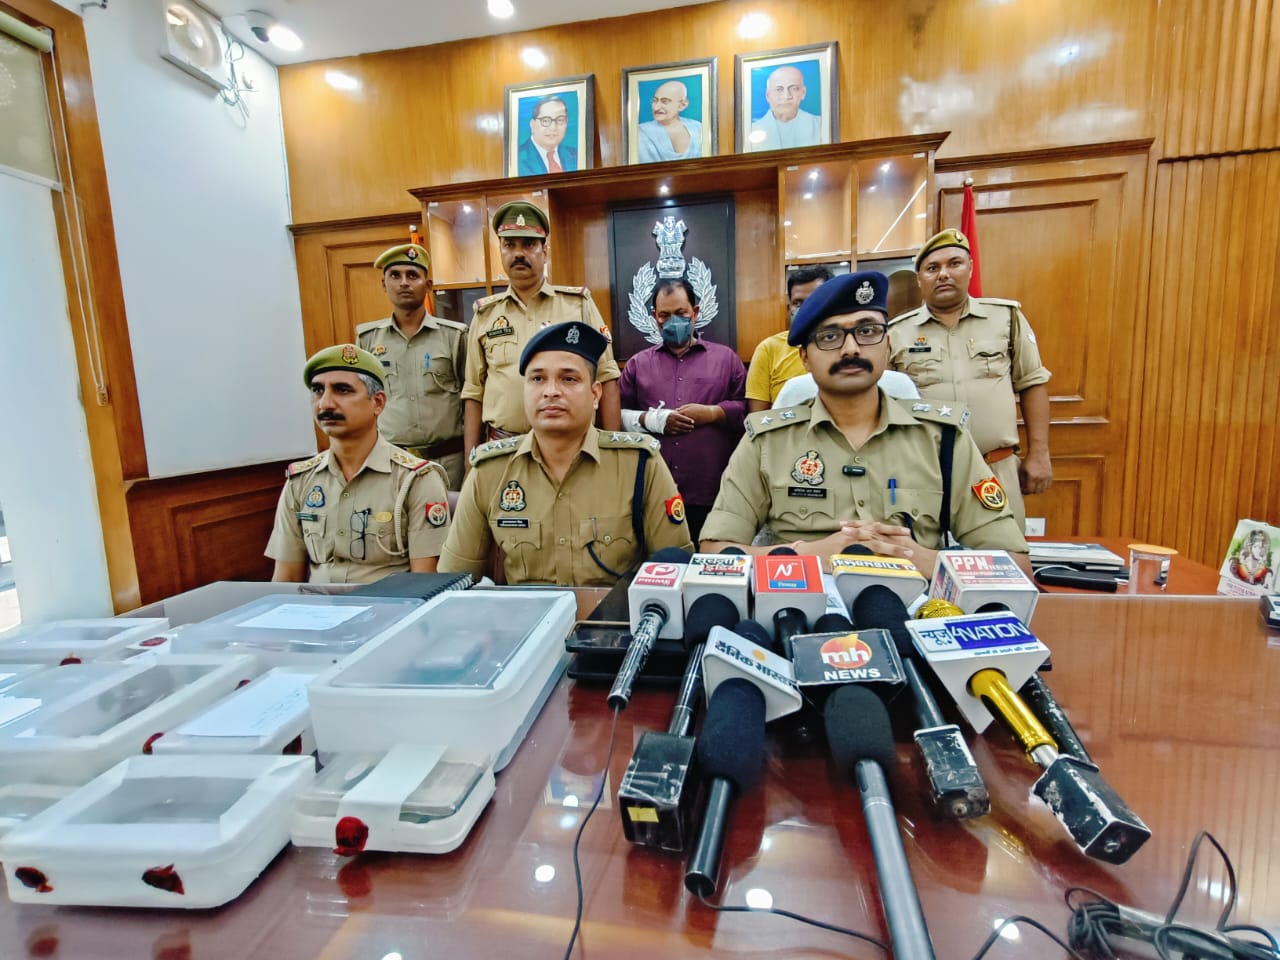 Two inter-district criminals were arrested by a joint police team of DCP (East) and Vibhutikhand police station and stolen jewellery (white metal weighing 10.50 kg, estimated to be worth about Rs. 9 lakh) and Rs. 14,000 cash was recovered from their possession.